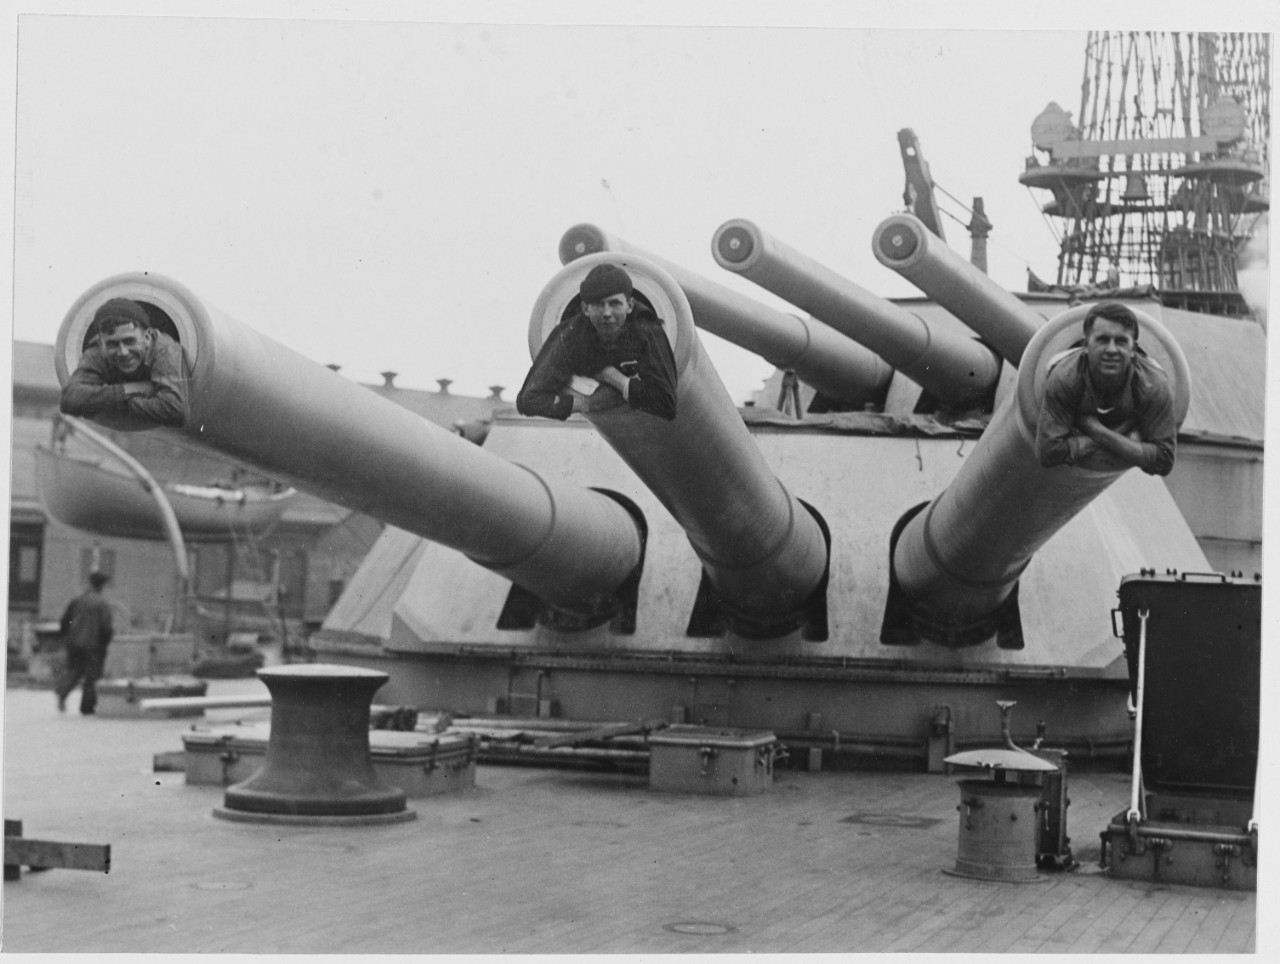 Three Jackies looking out of the 14 inch guns of the USS IDAHO (BB-42), April 10, 1919